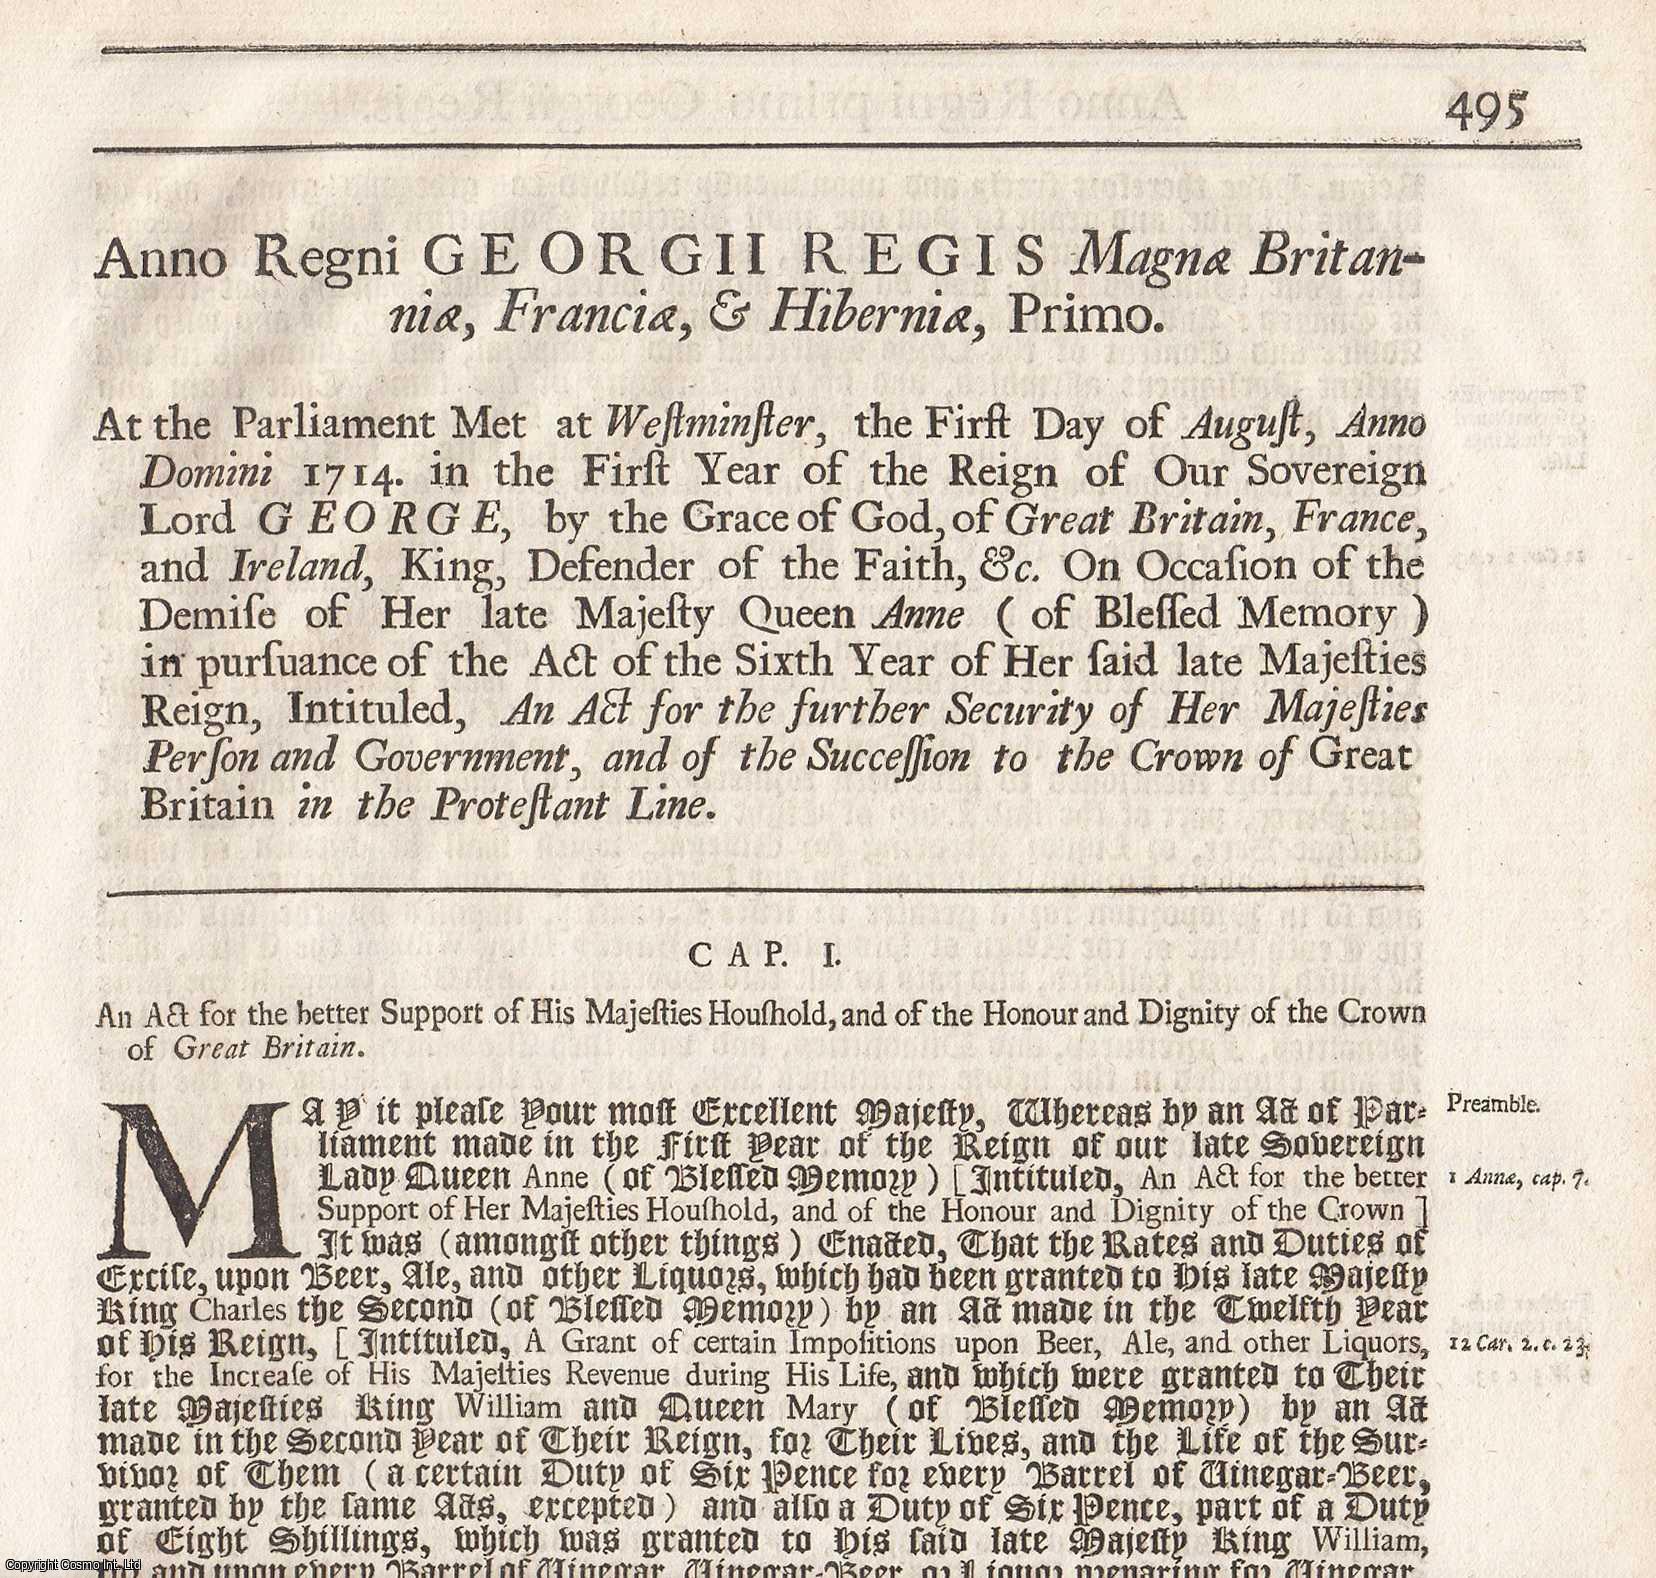 King George I - Civil List Act 1714 c.1. An Act for The Support of His Majesties Household, and of The Honour and Dignity of The Crown of Great Britain.